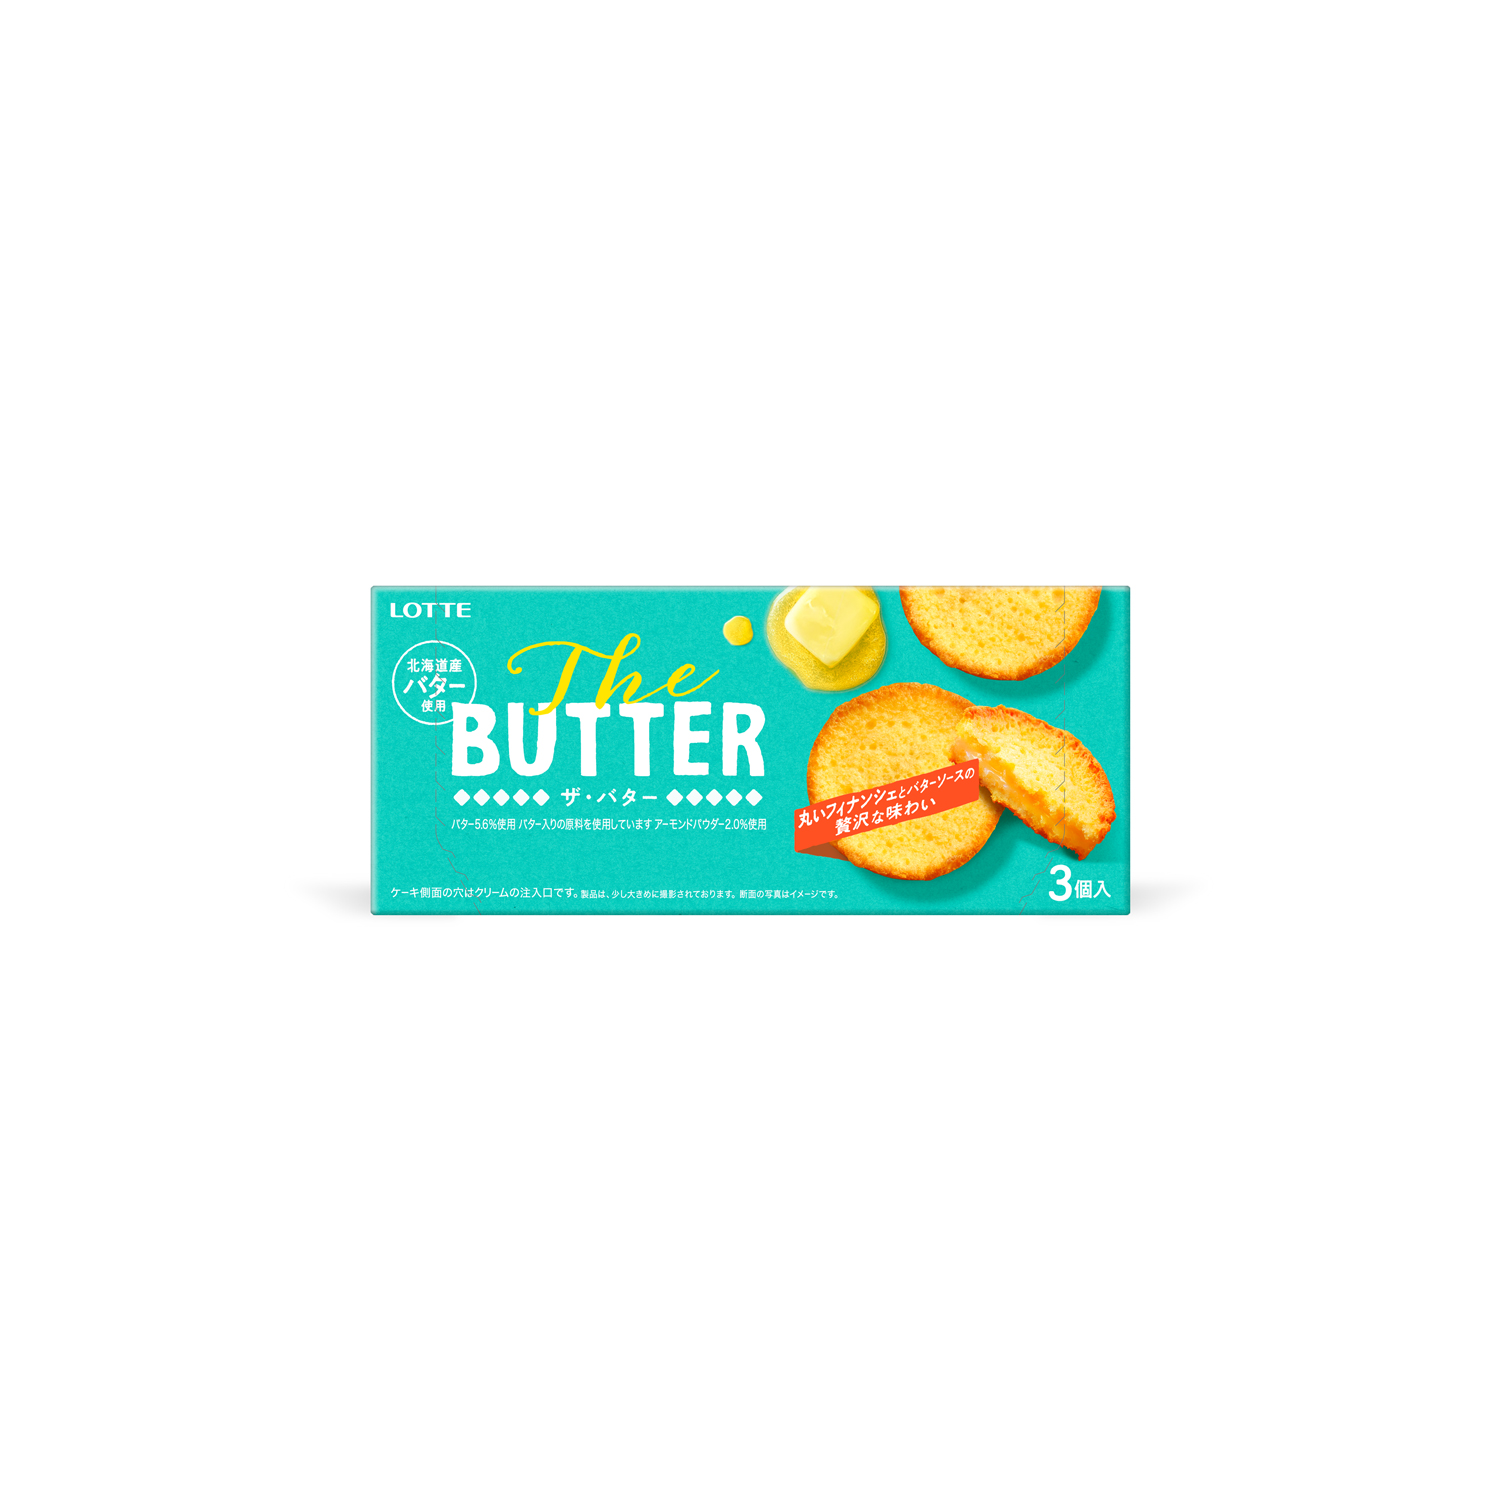 The BUTTERのデザイン